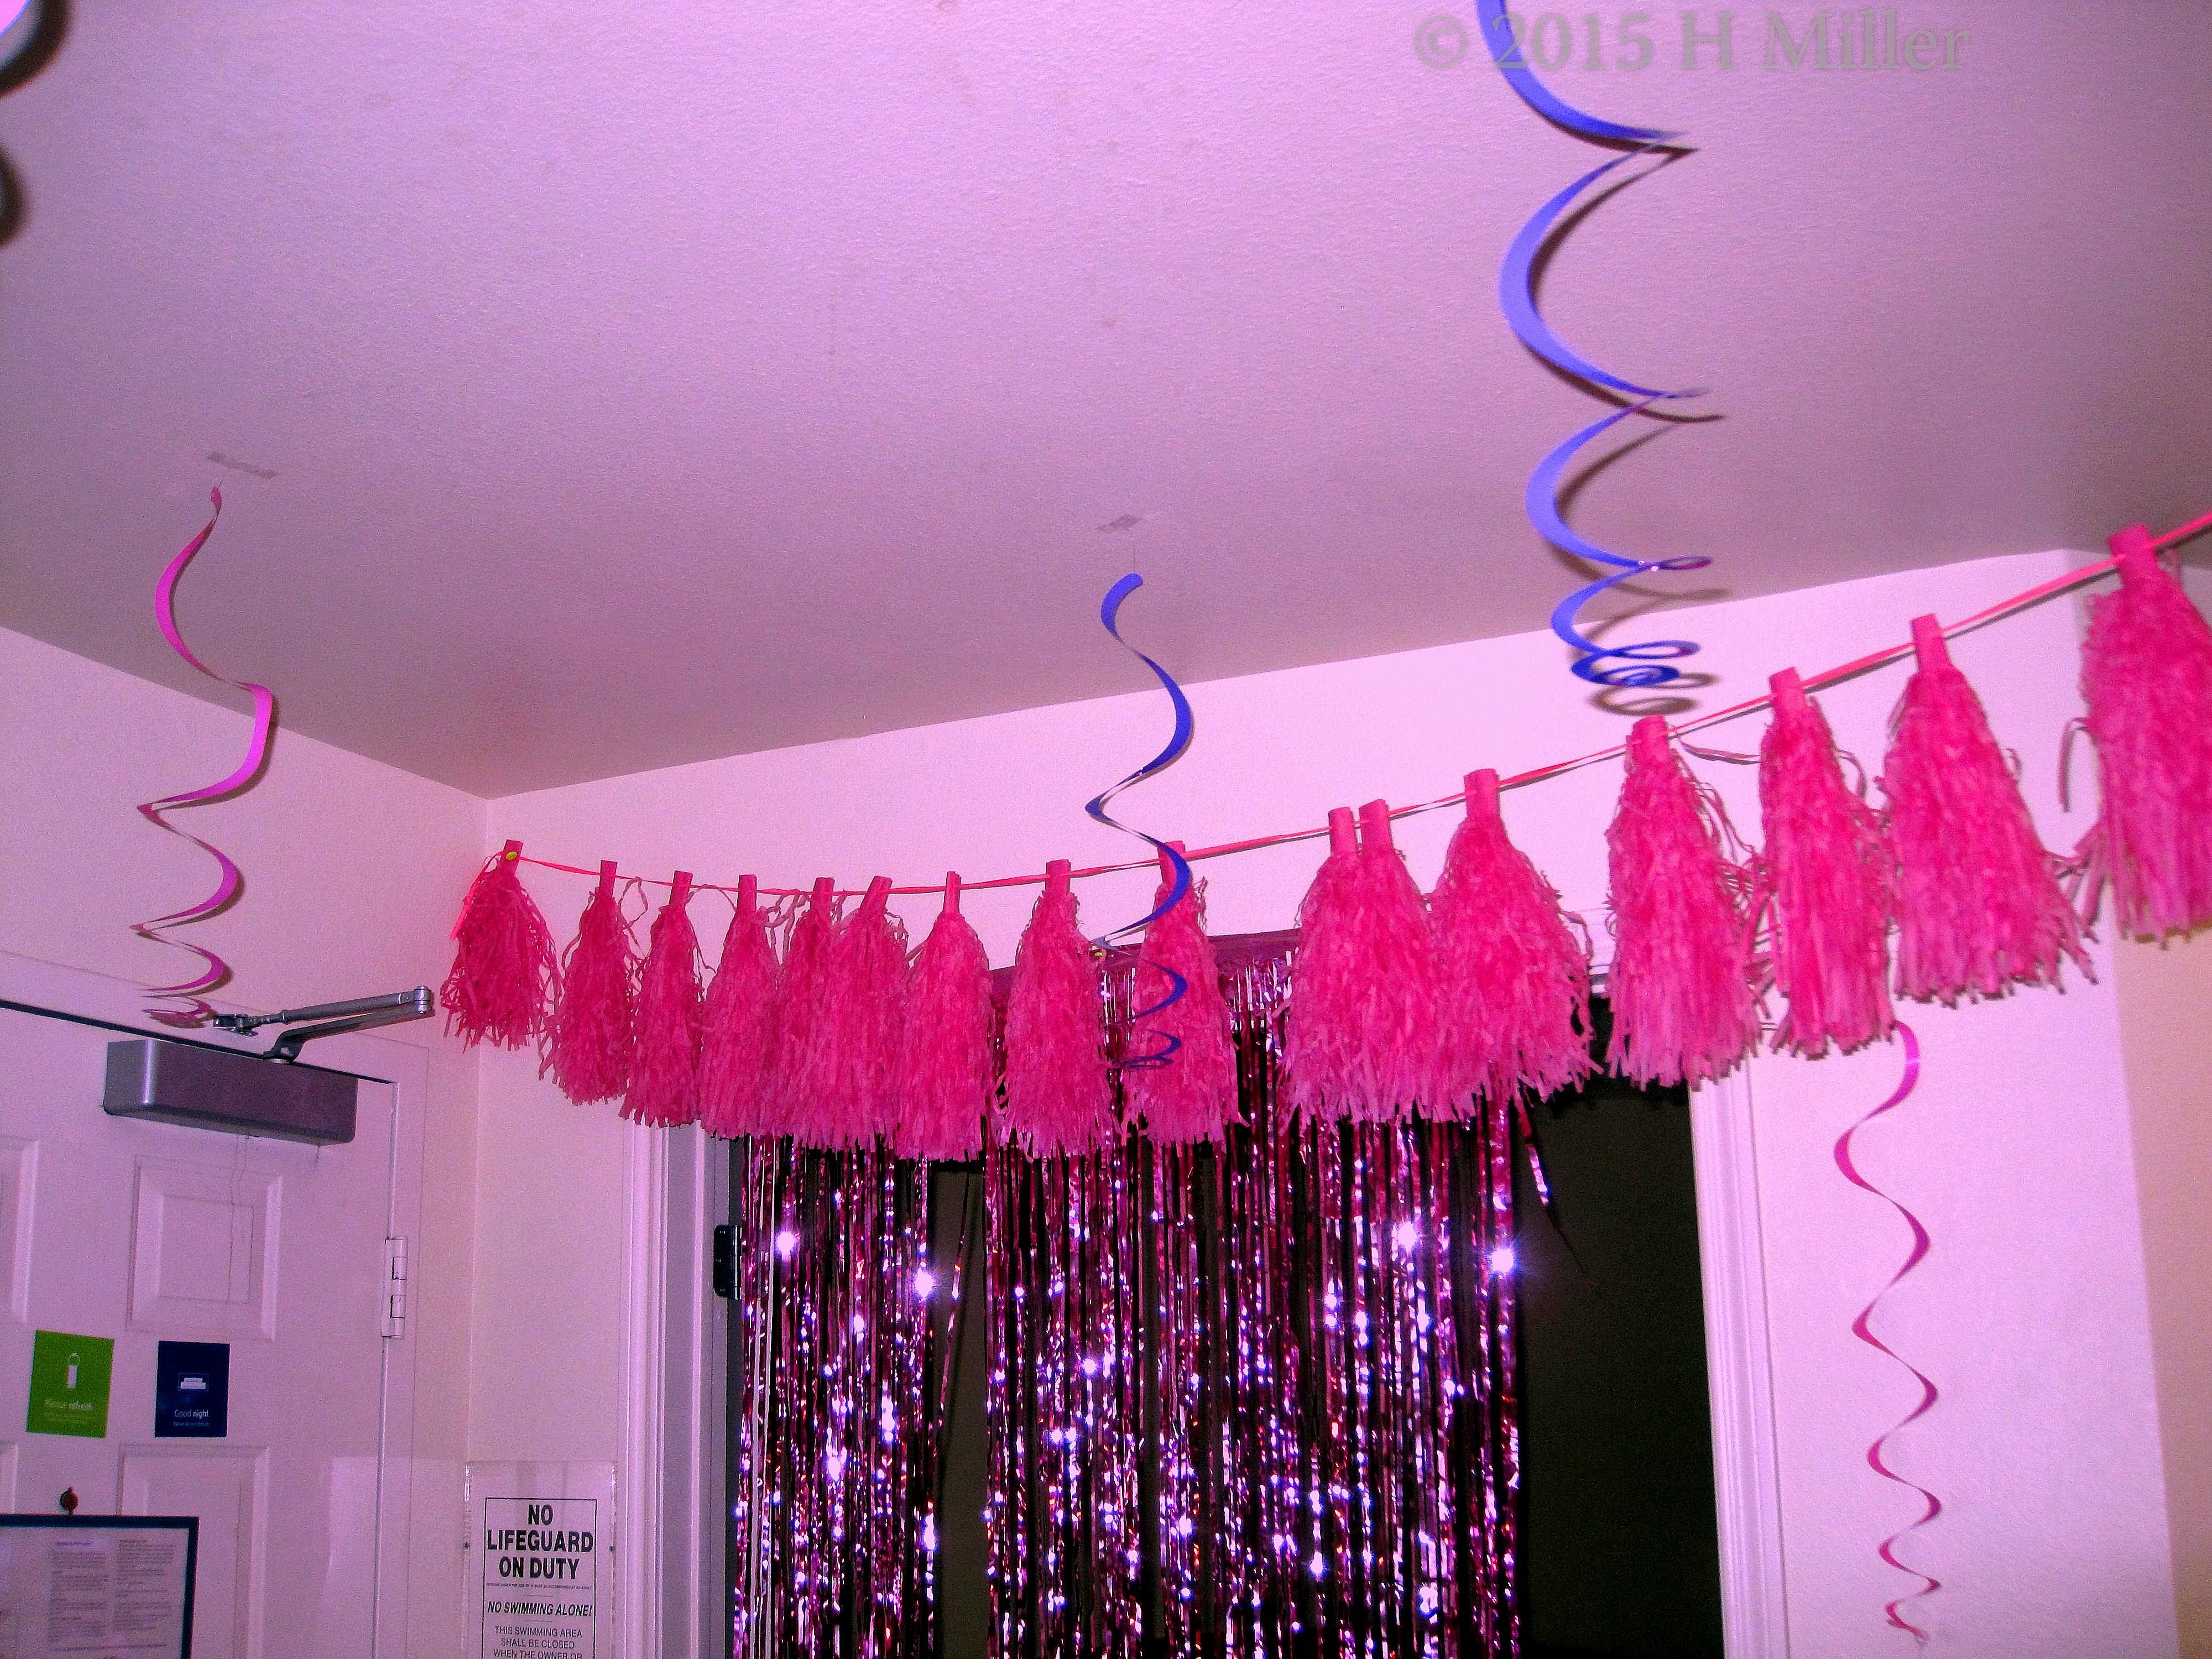 Spa Party Room Decorations Courtesy Of Tori's Family. 